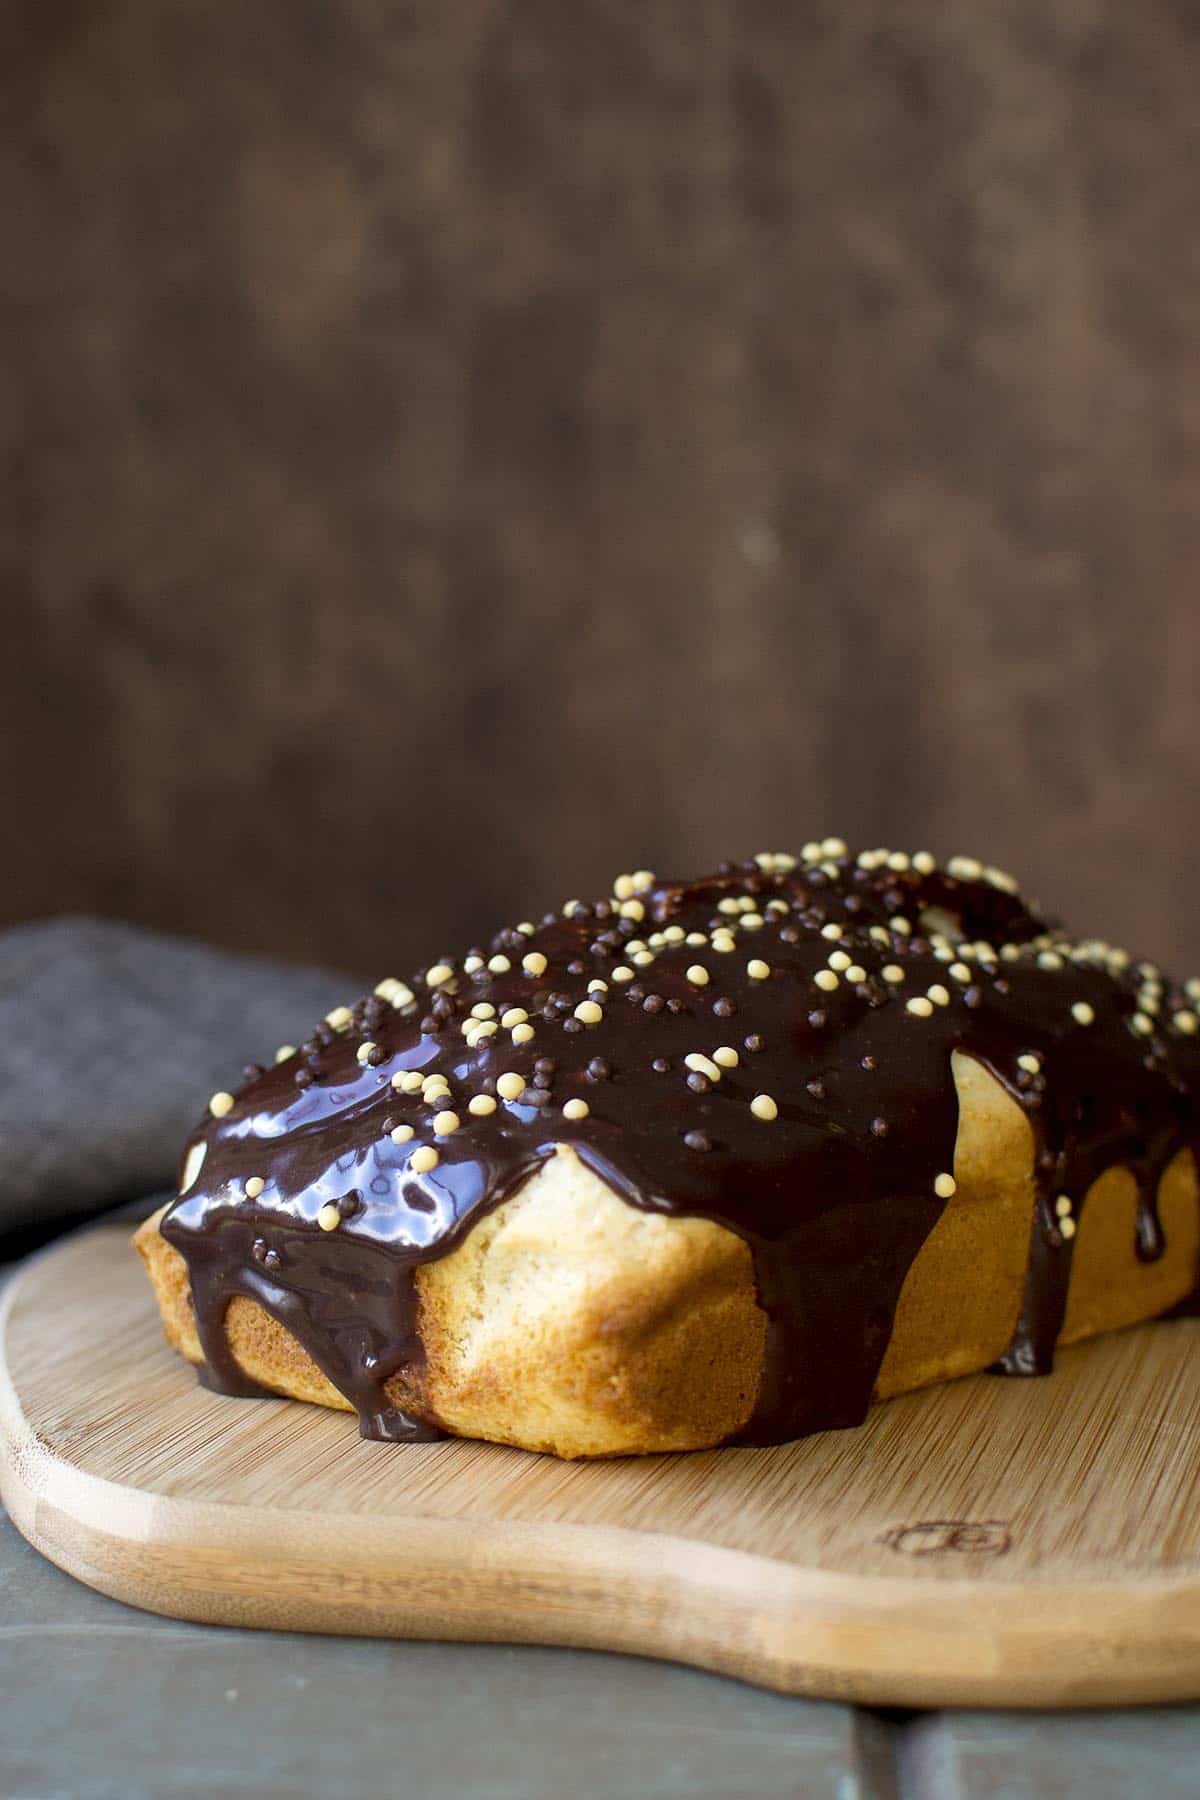 Chocolate ganache topped ice cream loaf bread